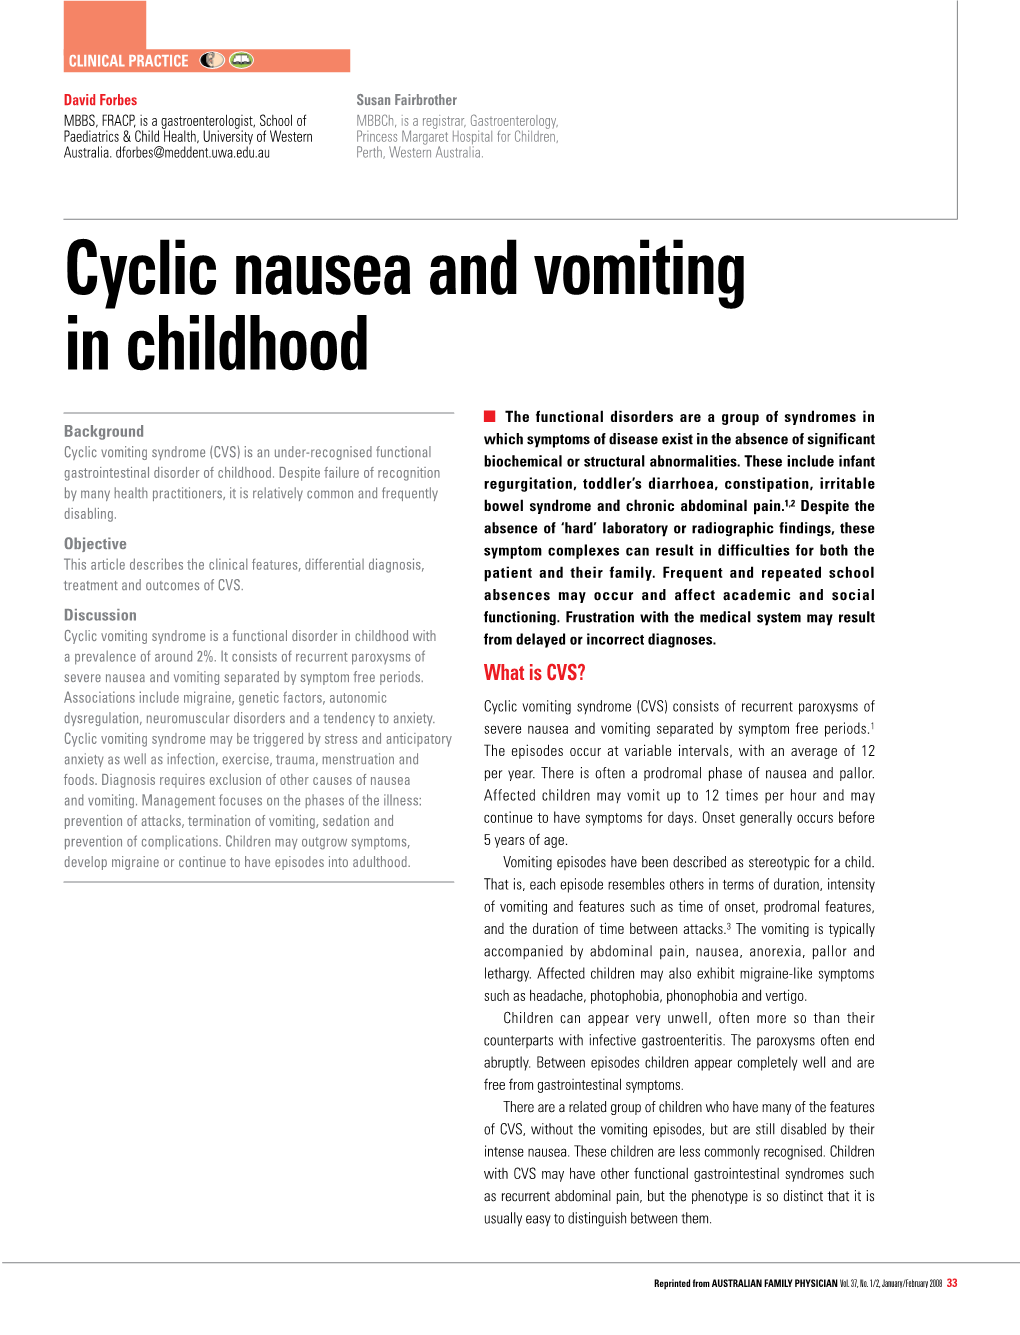 Cyclic Nausea and Vomiting in Childhood